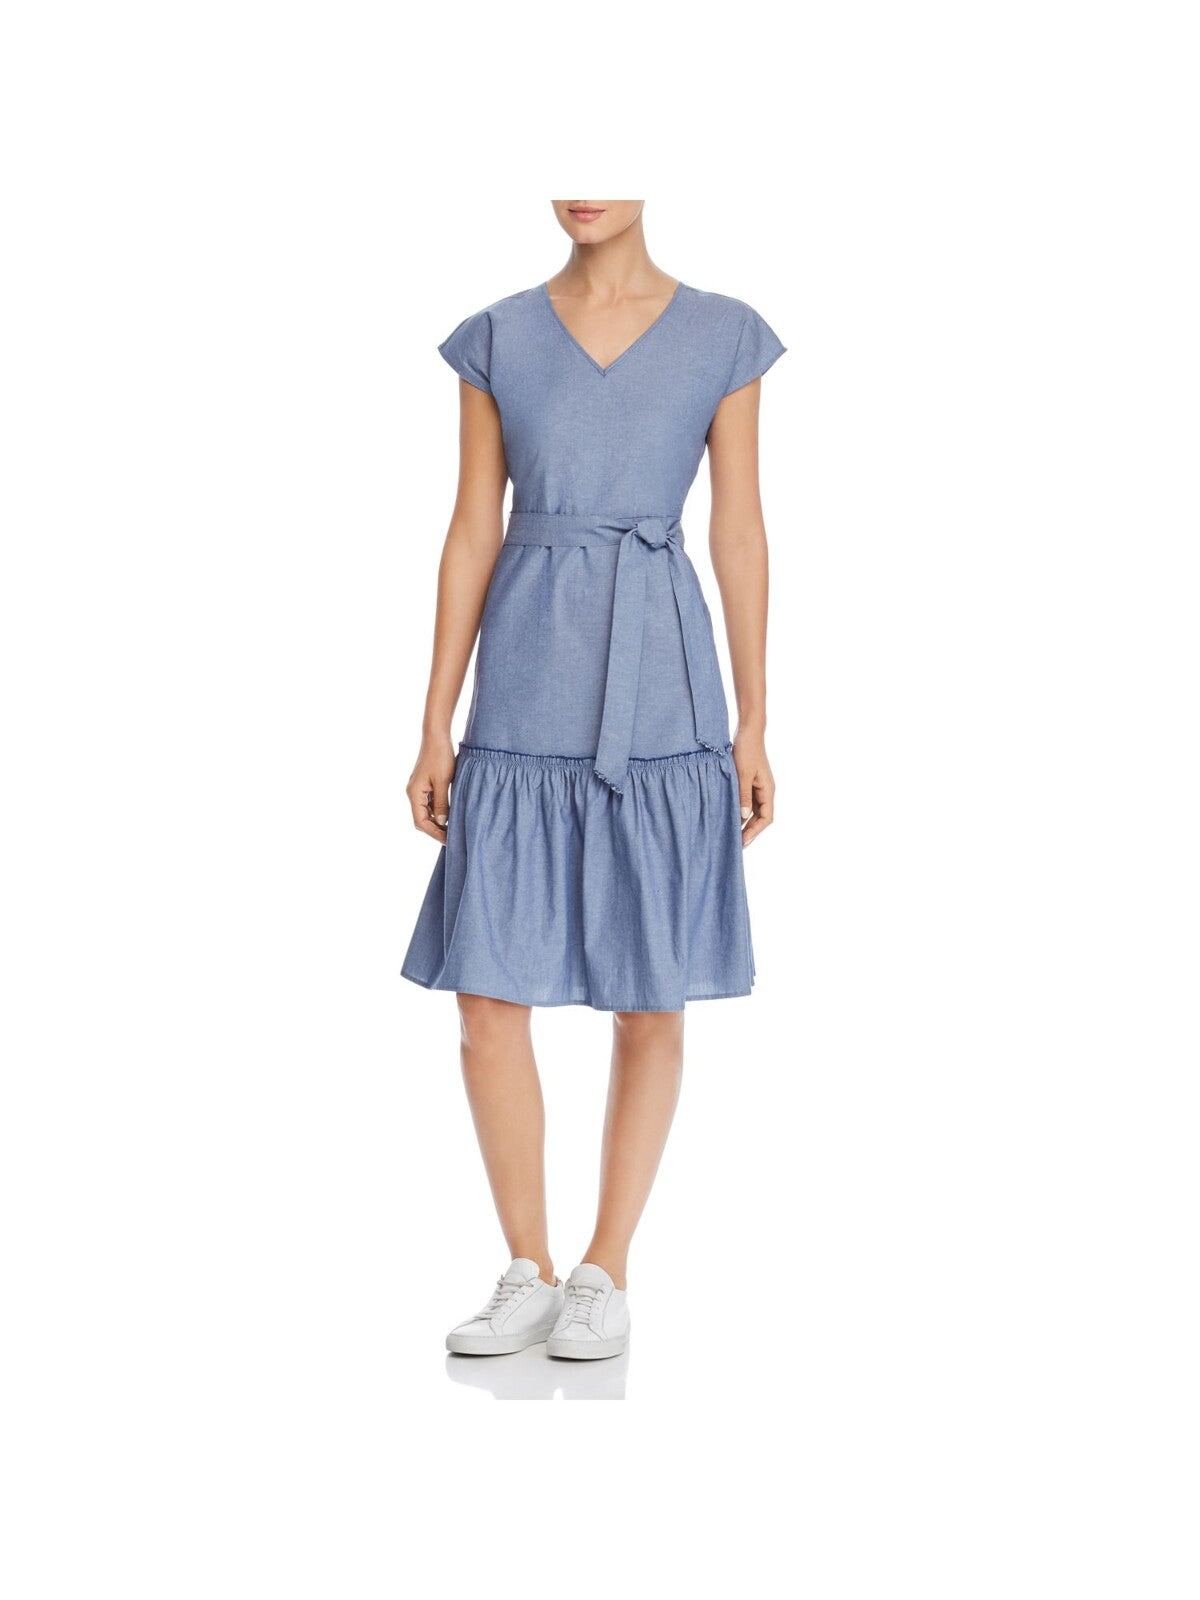 DESIGN HISTORY Womens Blue Chambray Zippered Belted Pleated Cap Sleeve V Neck Above The Knee Fit + Flare Dress M